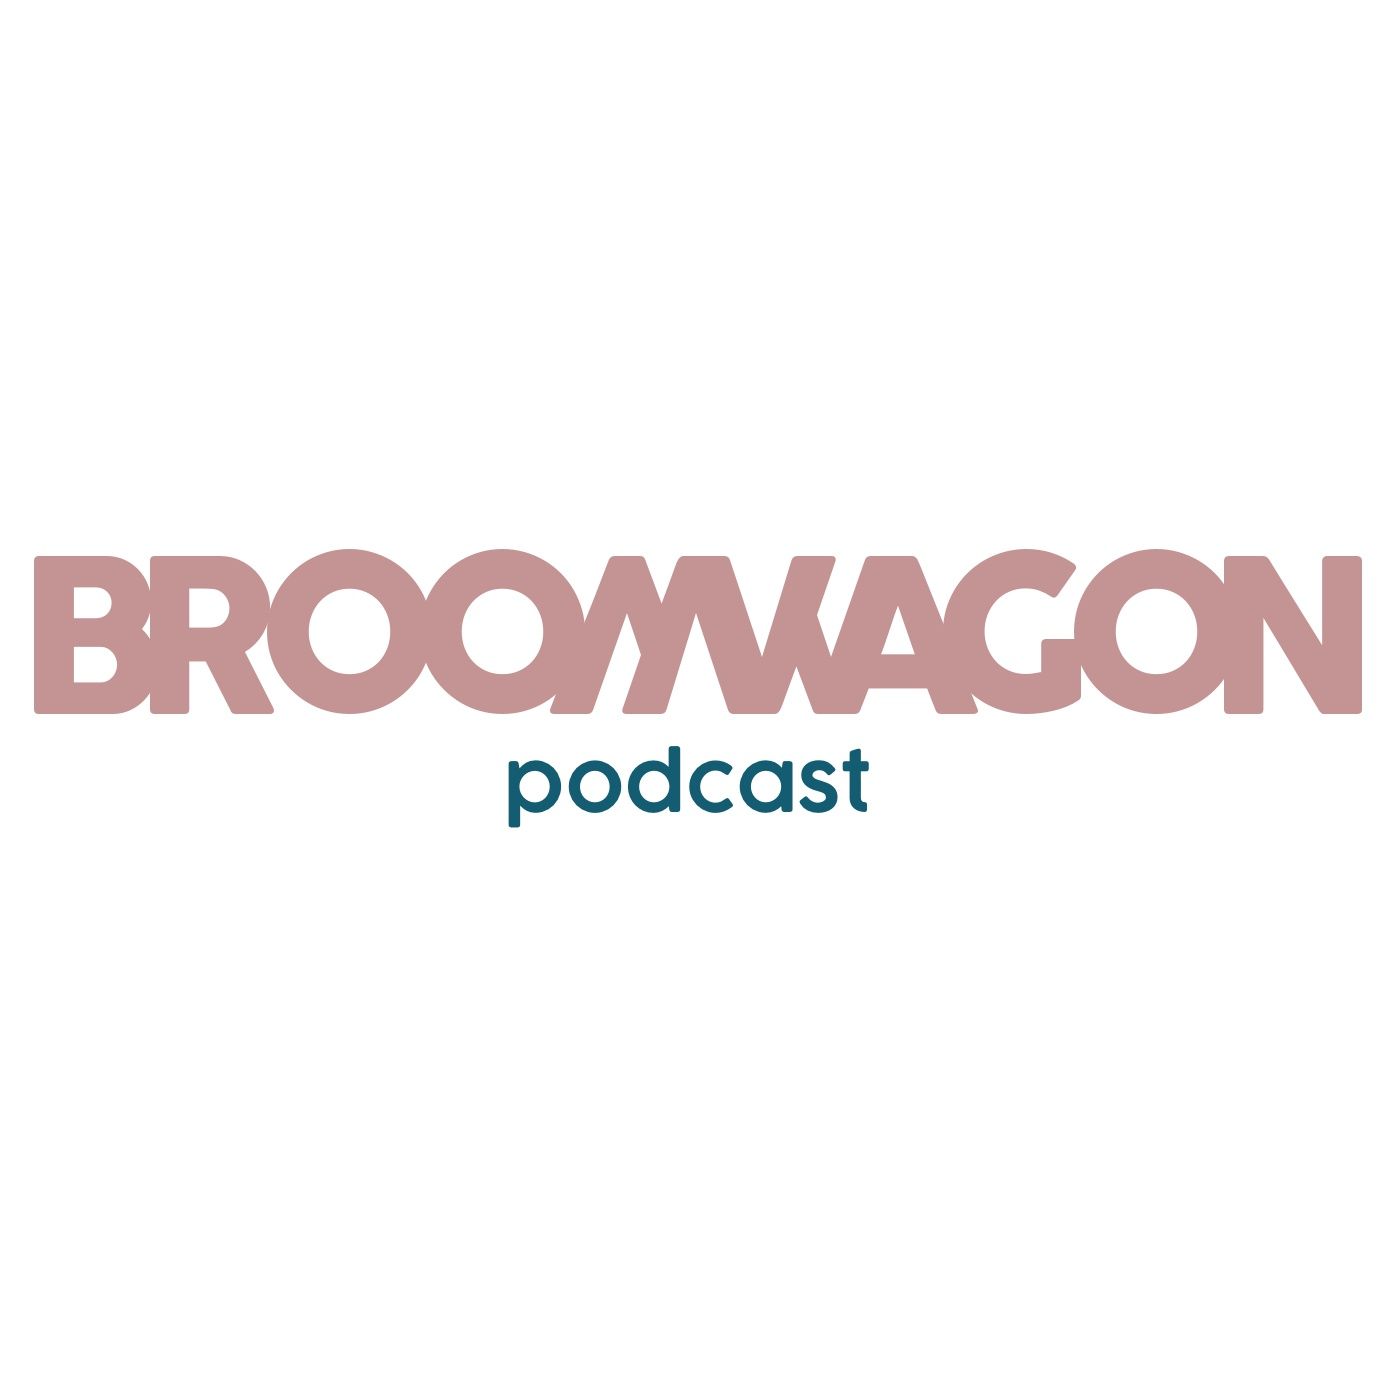 The BroomWagon Podcast